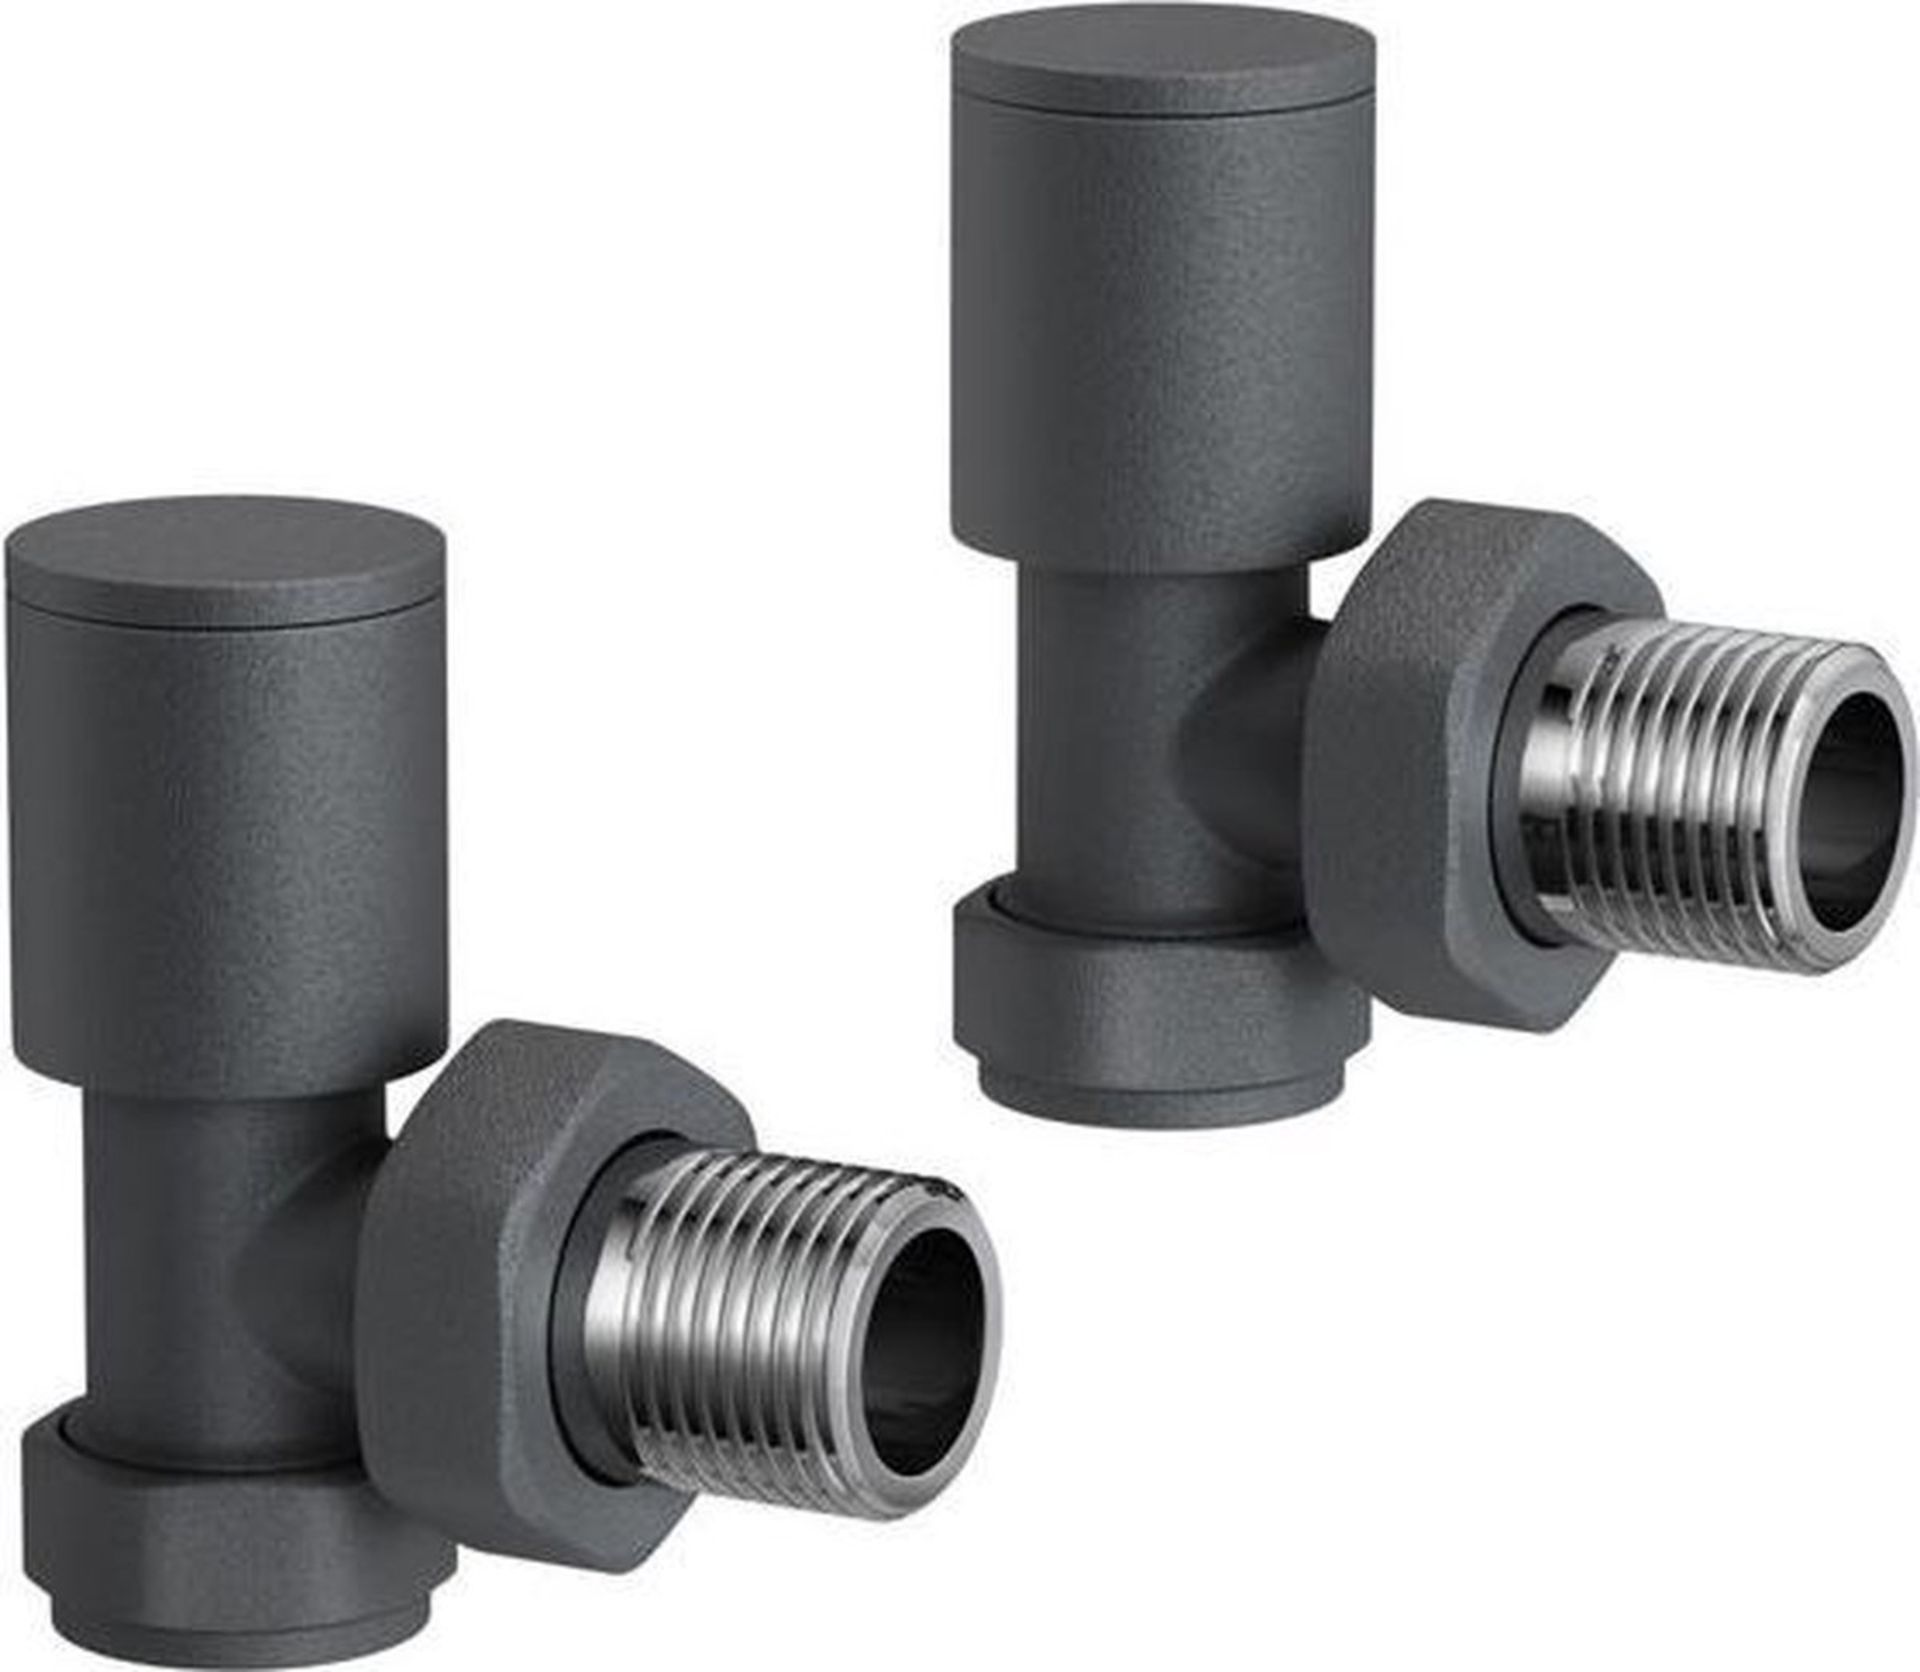 BRAND NEW BOXED 15 mm Standard Connection Square Angled Anthracite Radiator Valves. RA03A.